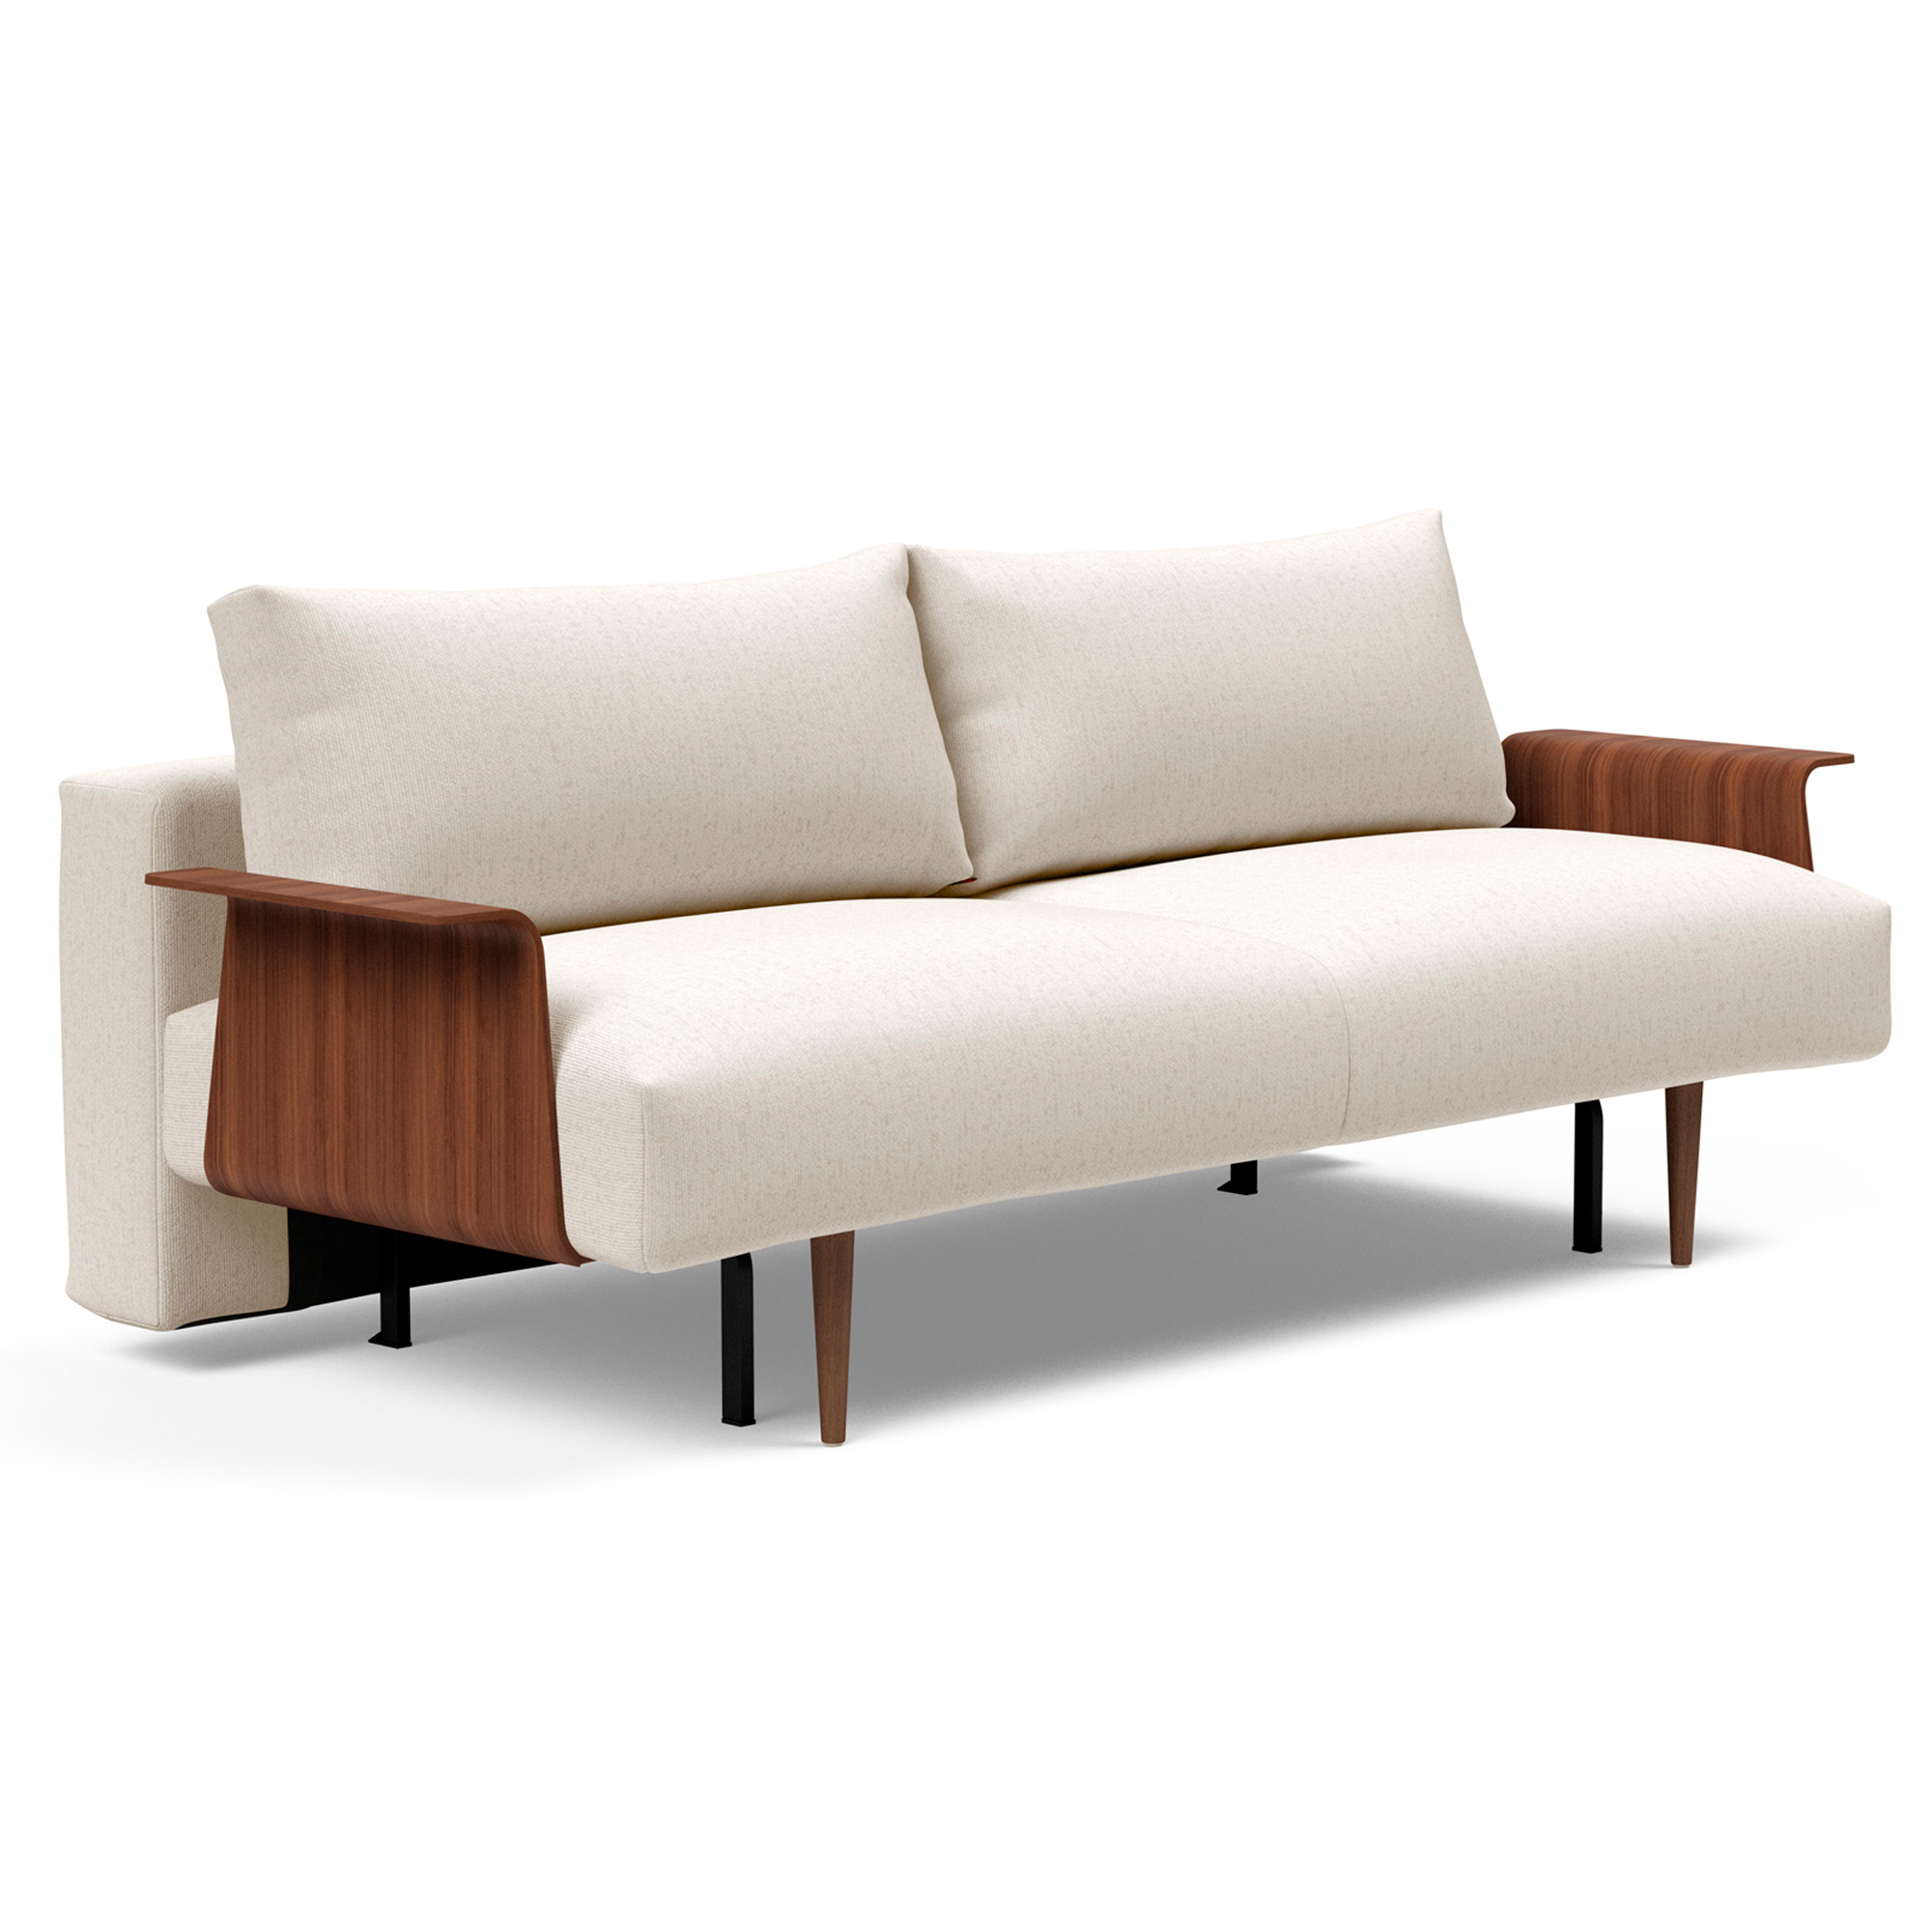 Frode Sofa with Wood Arms in Boucle OffWhite Fabric in Boucle White by Innovation Living